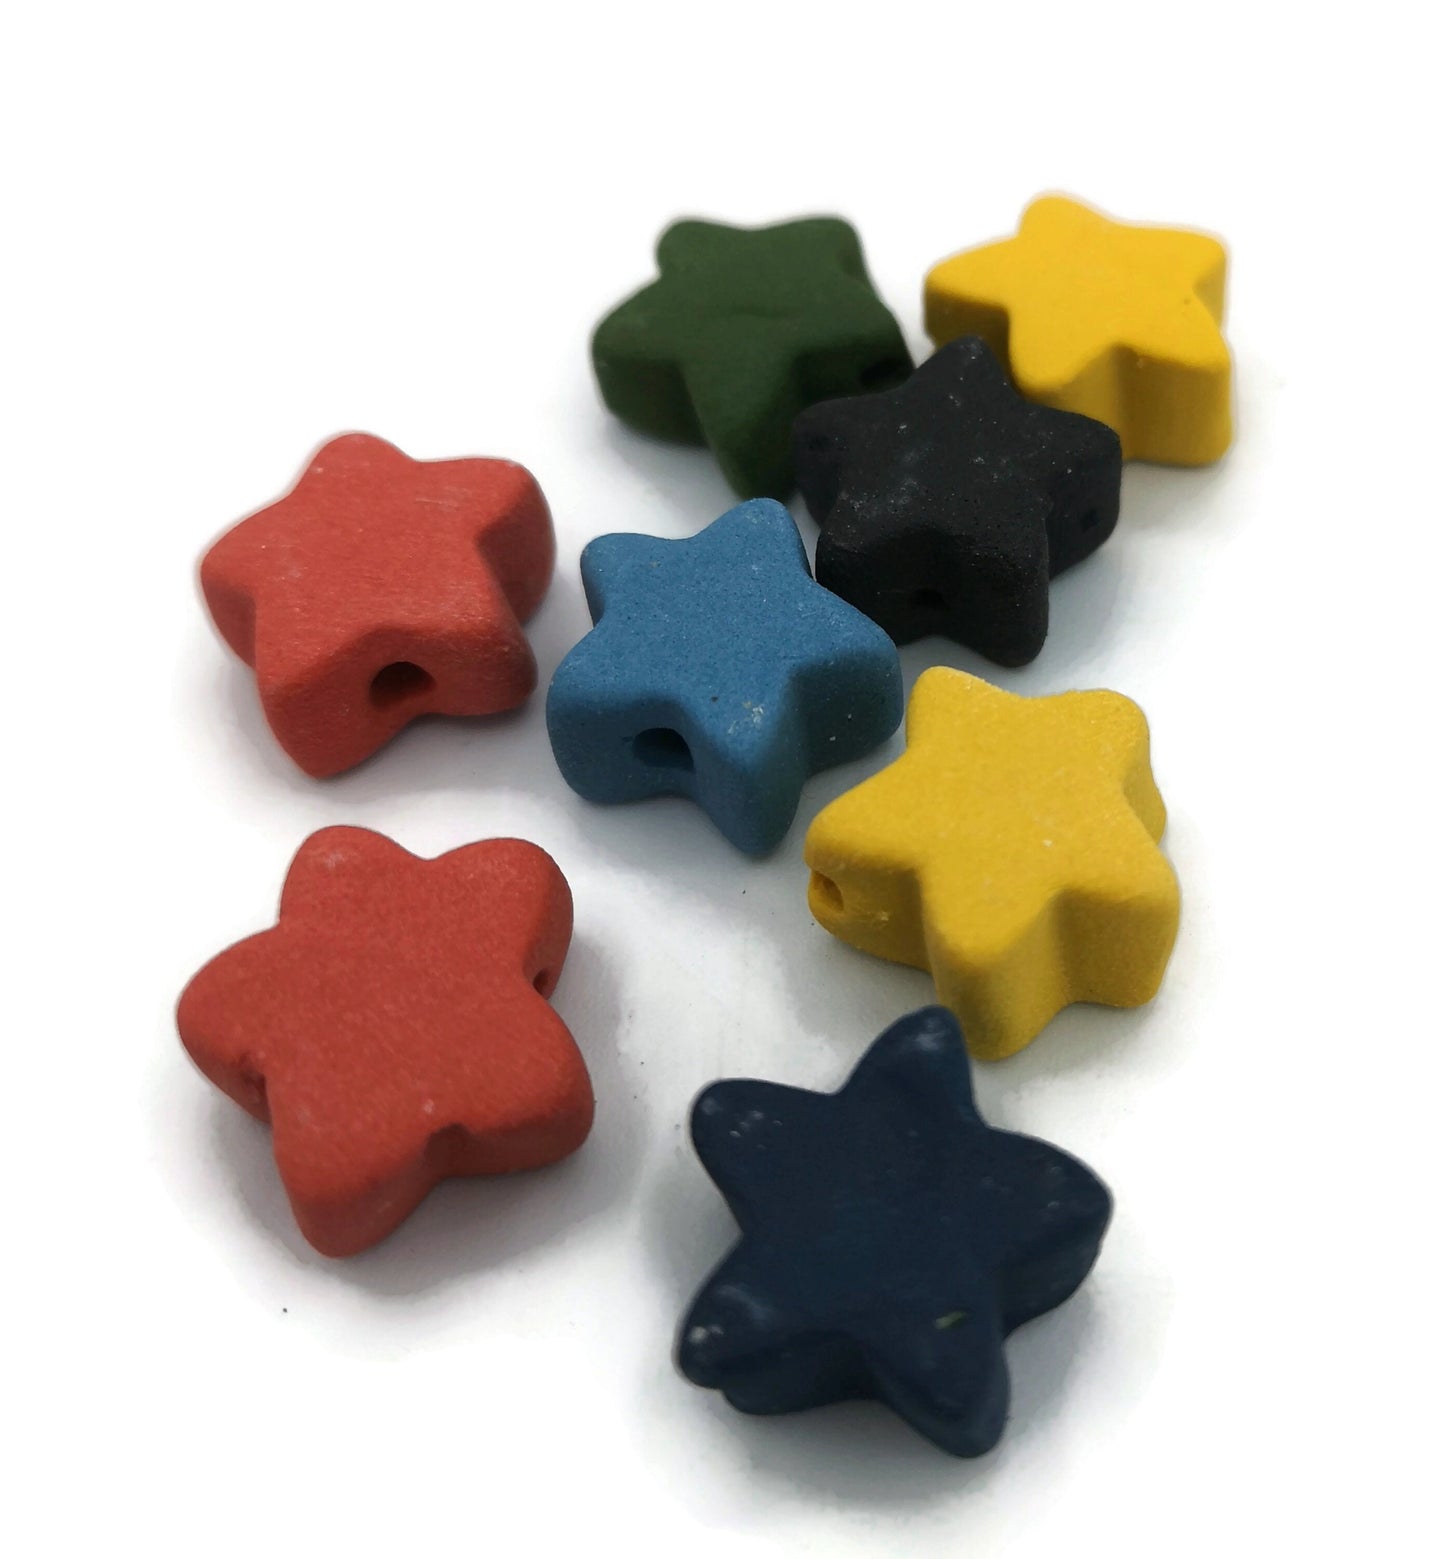 8 Pcs Handmade Ceramic Beads Ready To Ship, Cute Star Shape Assorted Beads For Jewelry Making, Unique Clay Spacer Beads, Most Sold Items - Ceramica Ana Rafael